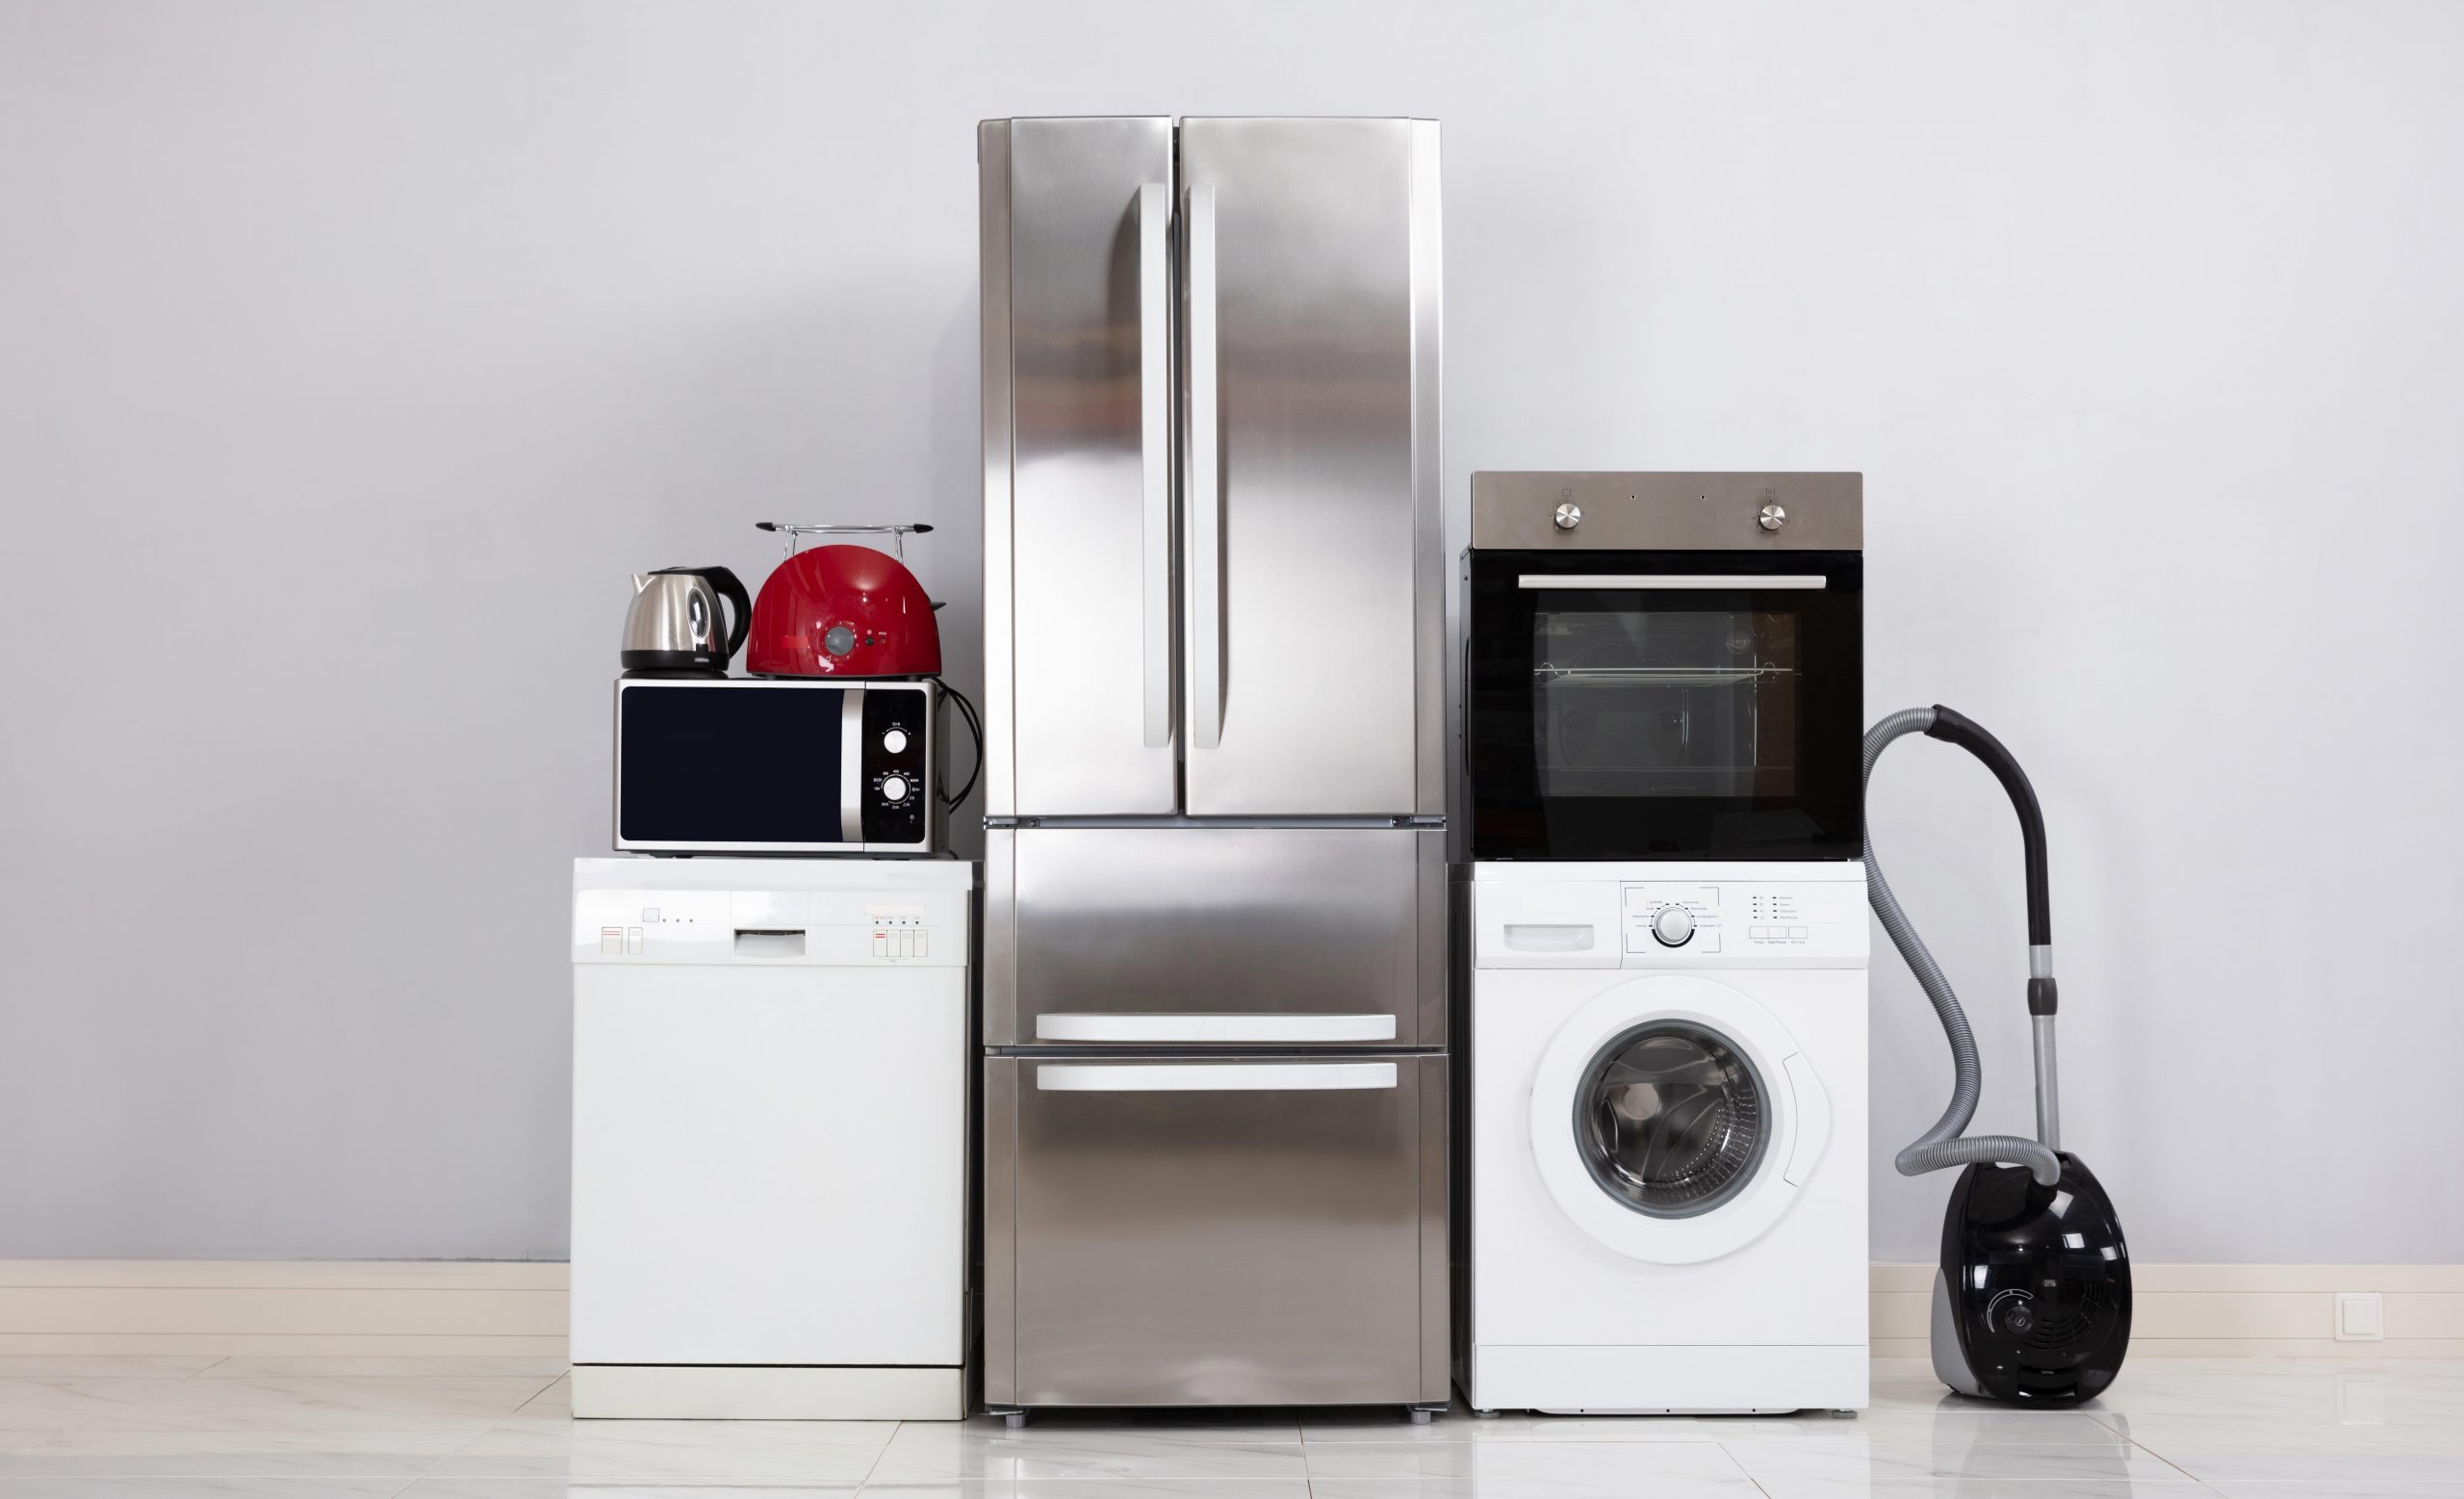 https://www.rd.com/wp-content/uploads/2019/09/home-appliances-2-scaled.jpg